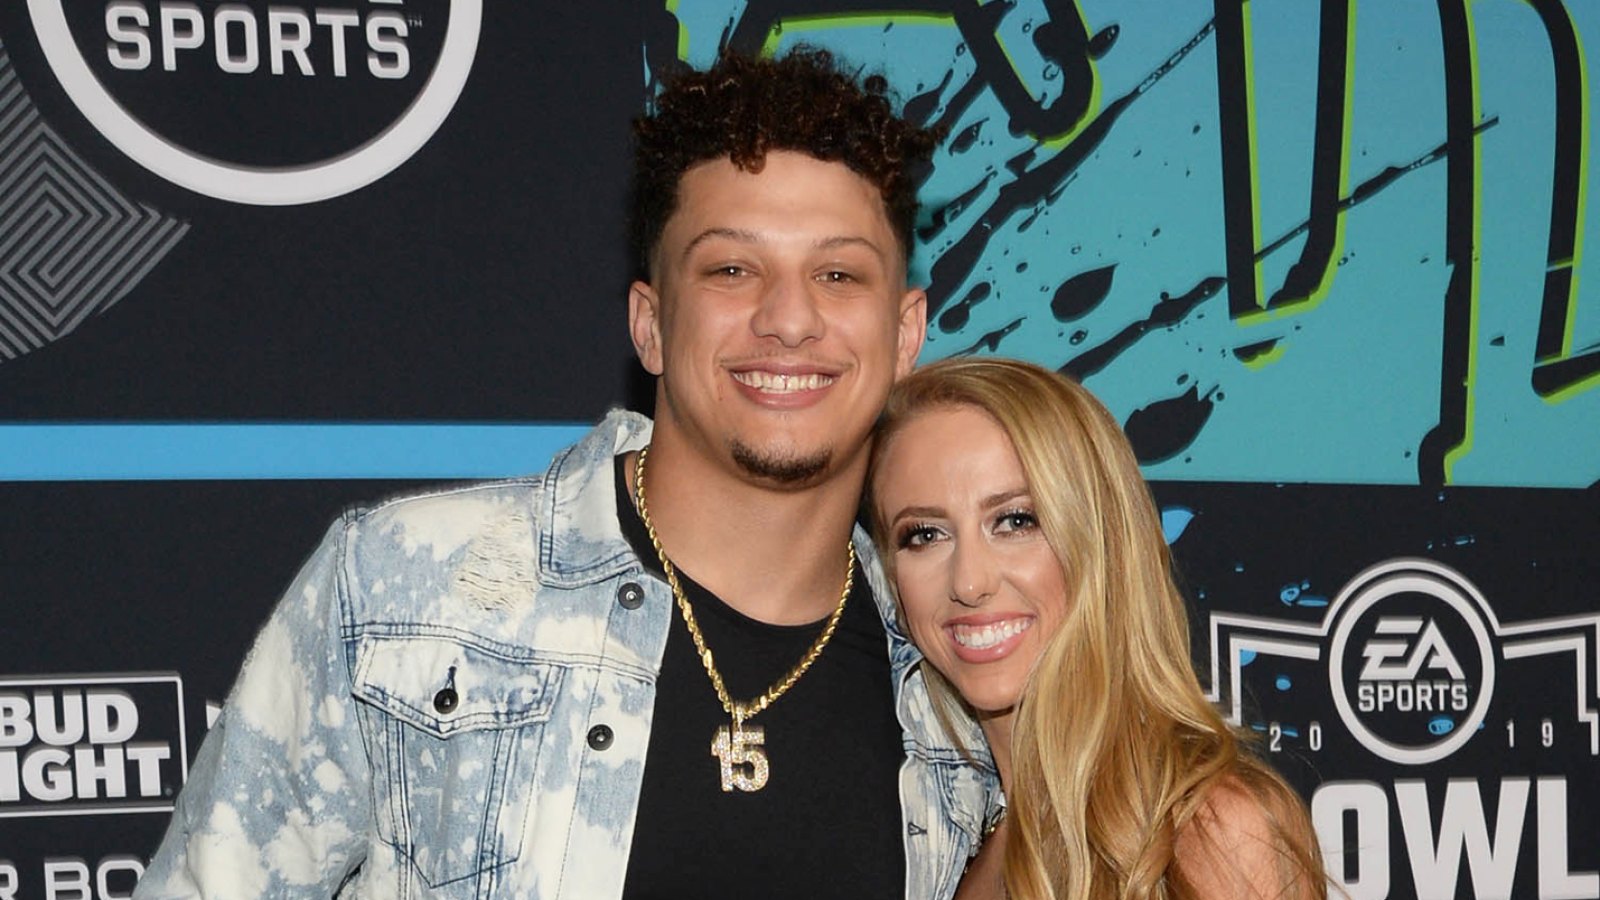 Pat Mahomes And His Fiancé's Bridal Party Gifts Are Better Than